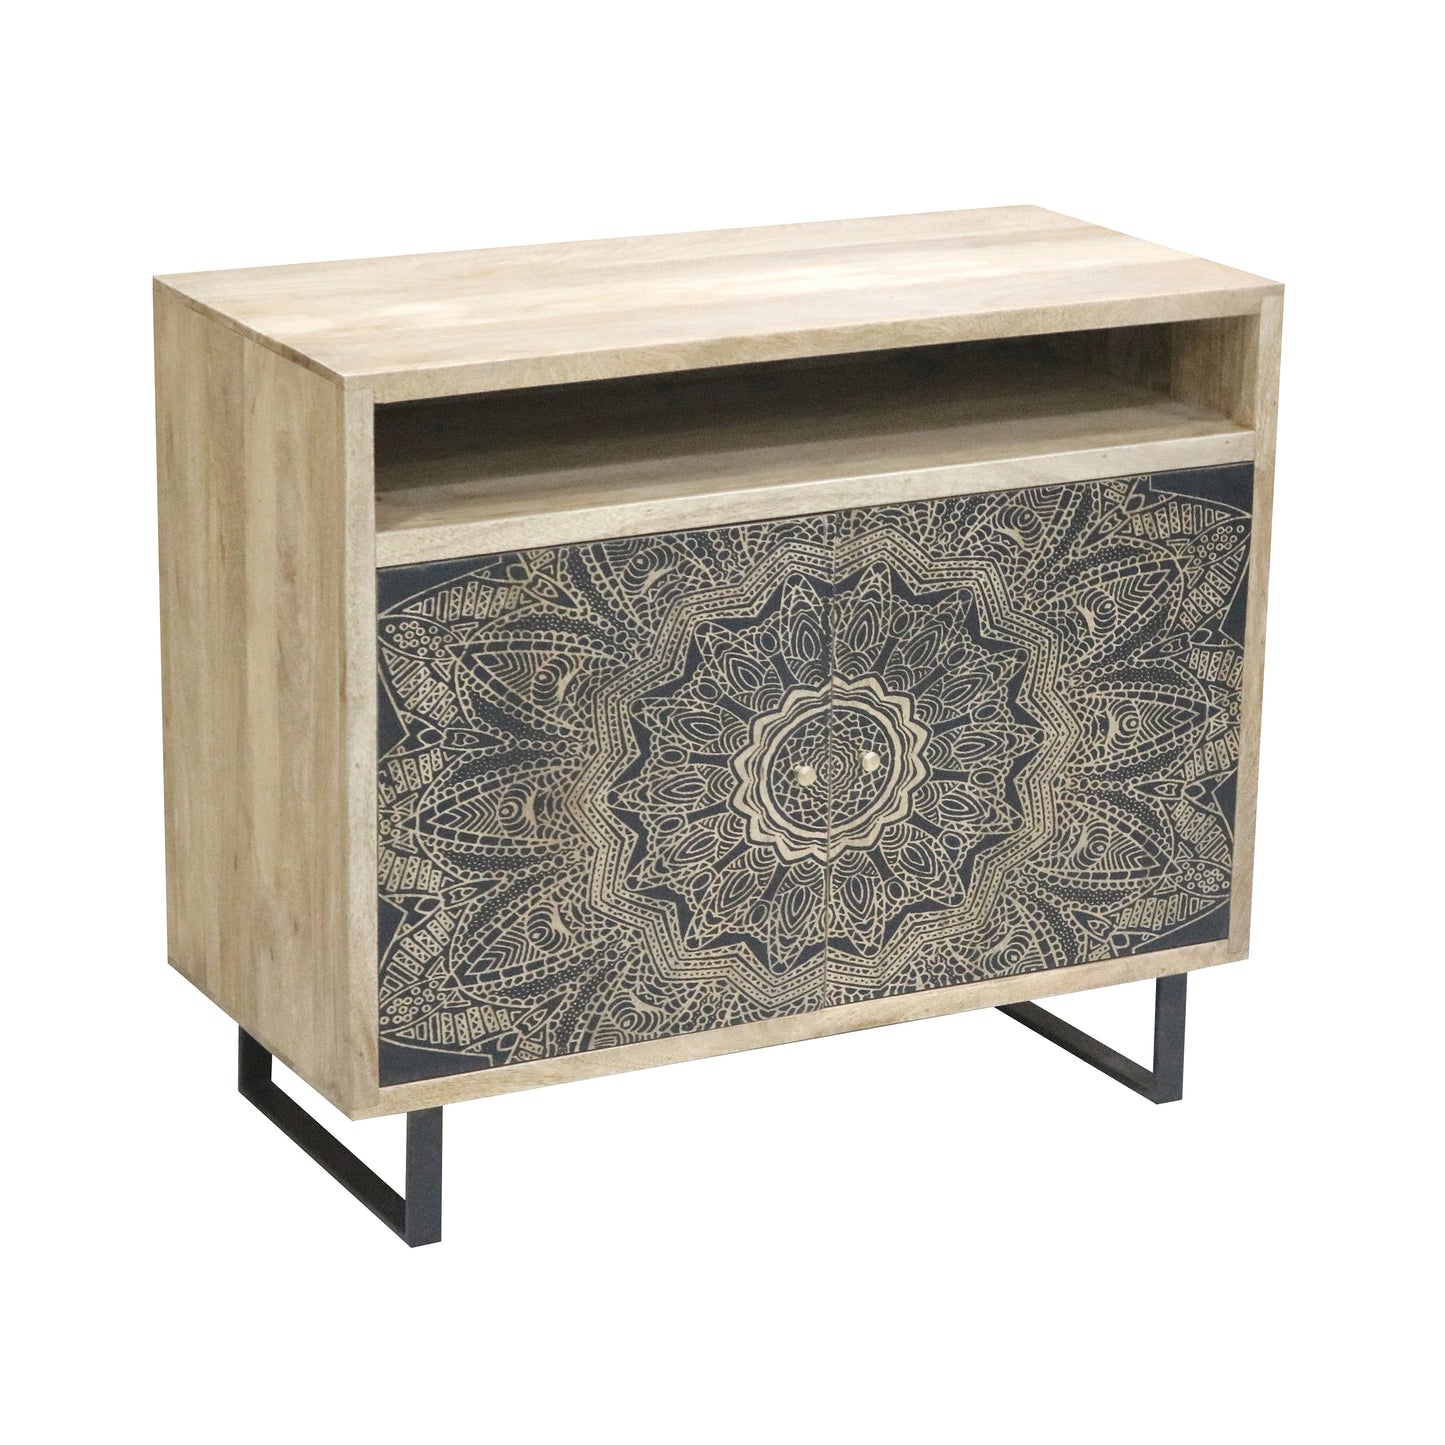 Right angled farmhouse natural and black two-door accent cabinet with medallion designs on a white background